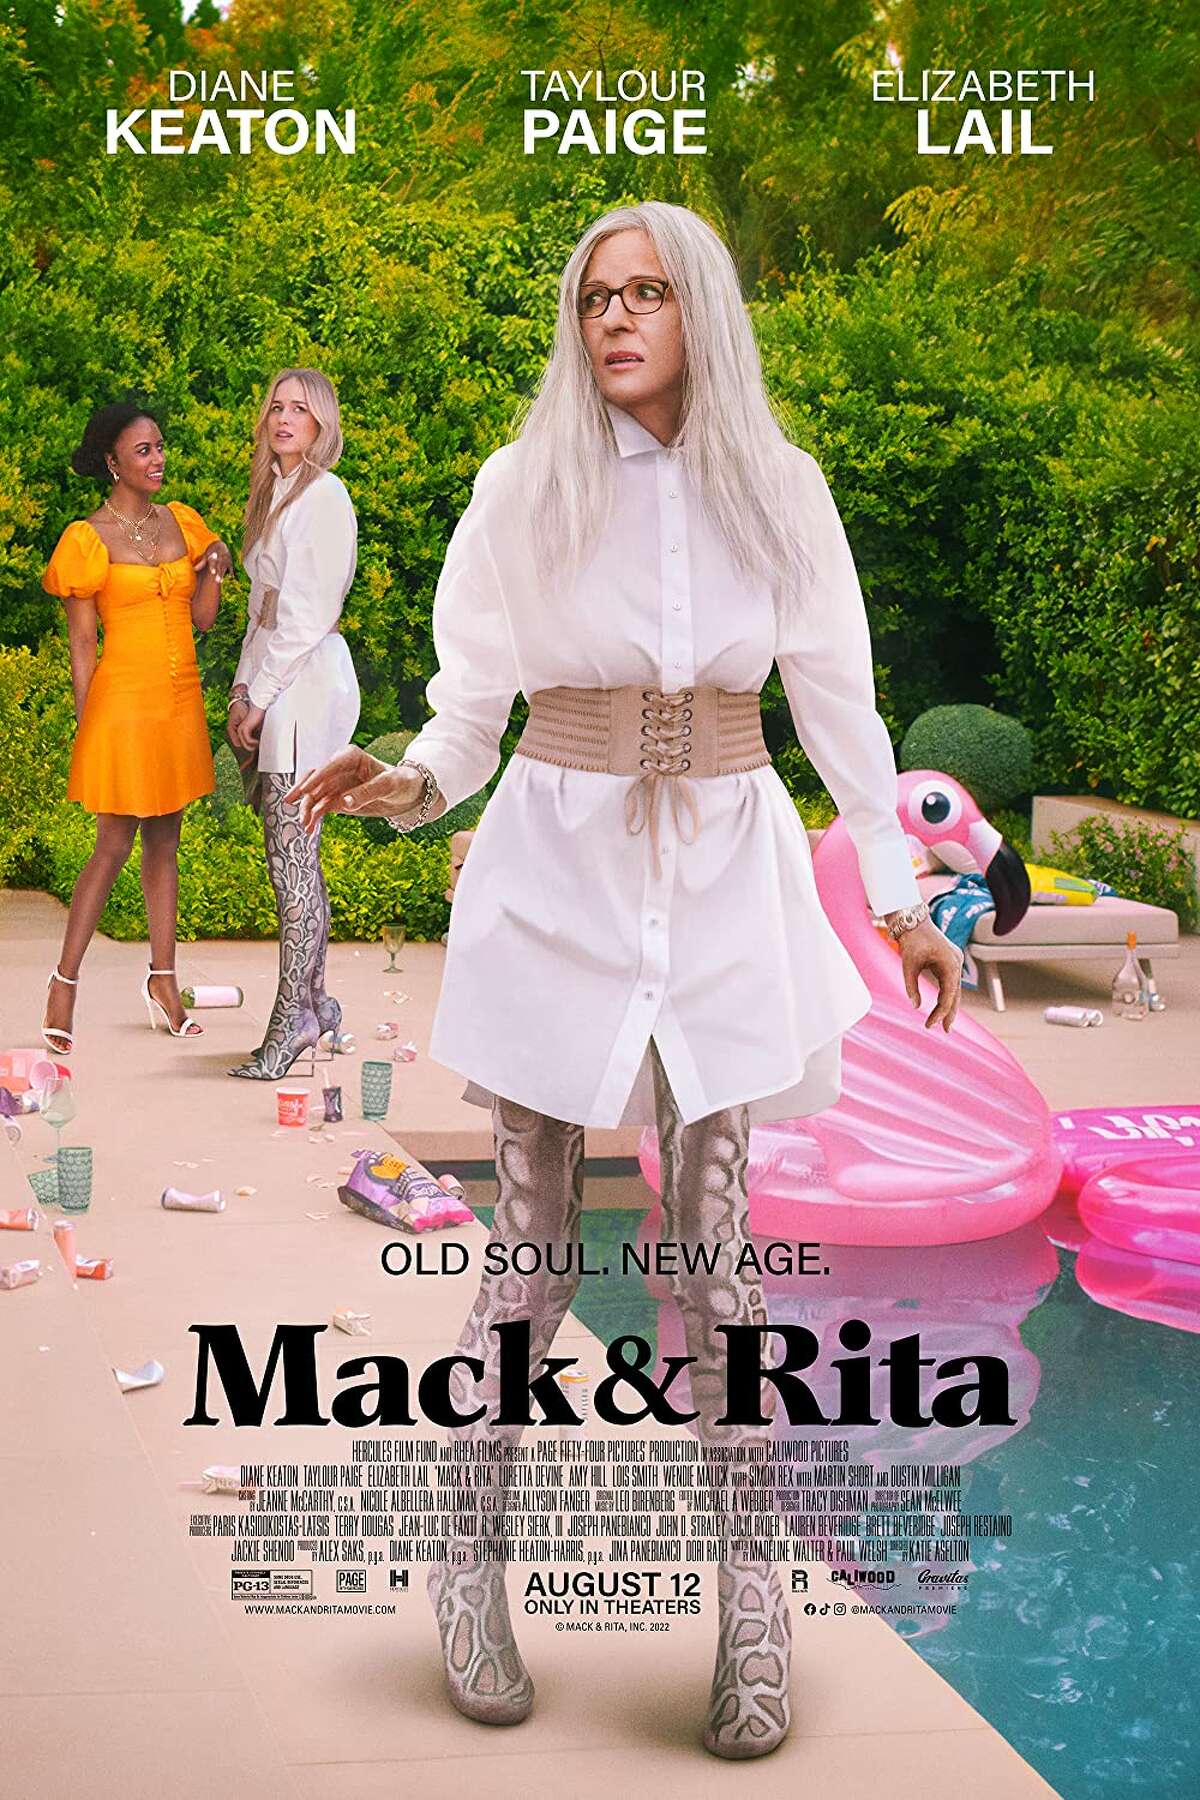 "Mack & Rita" will be screened at Gunn Memorial Library as part of the library's Monday Movie Matinees on Feb. 13 at 1 p.m.